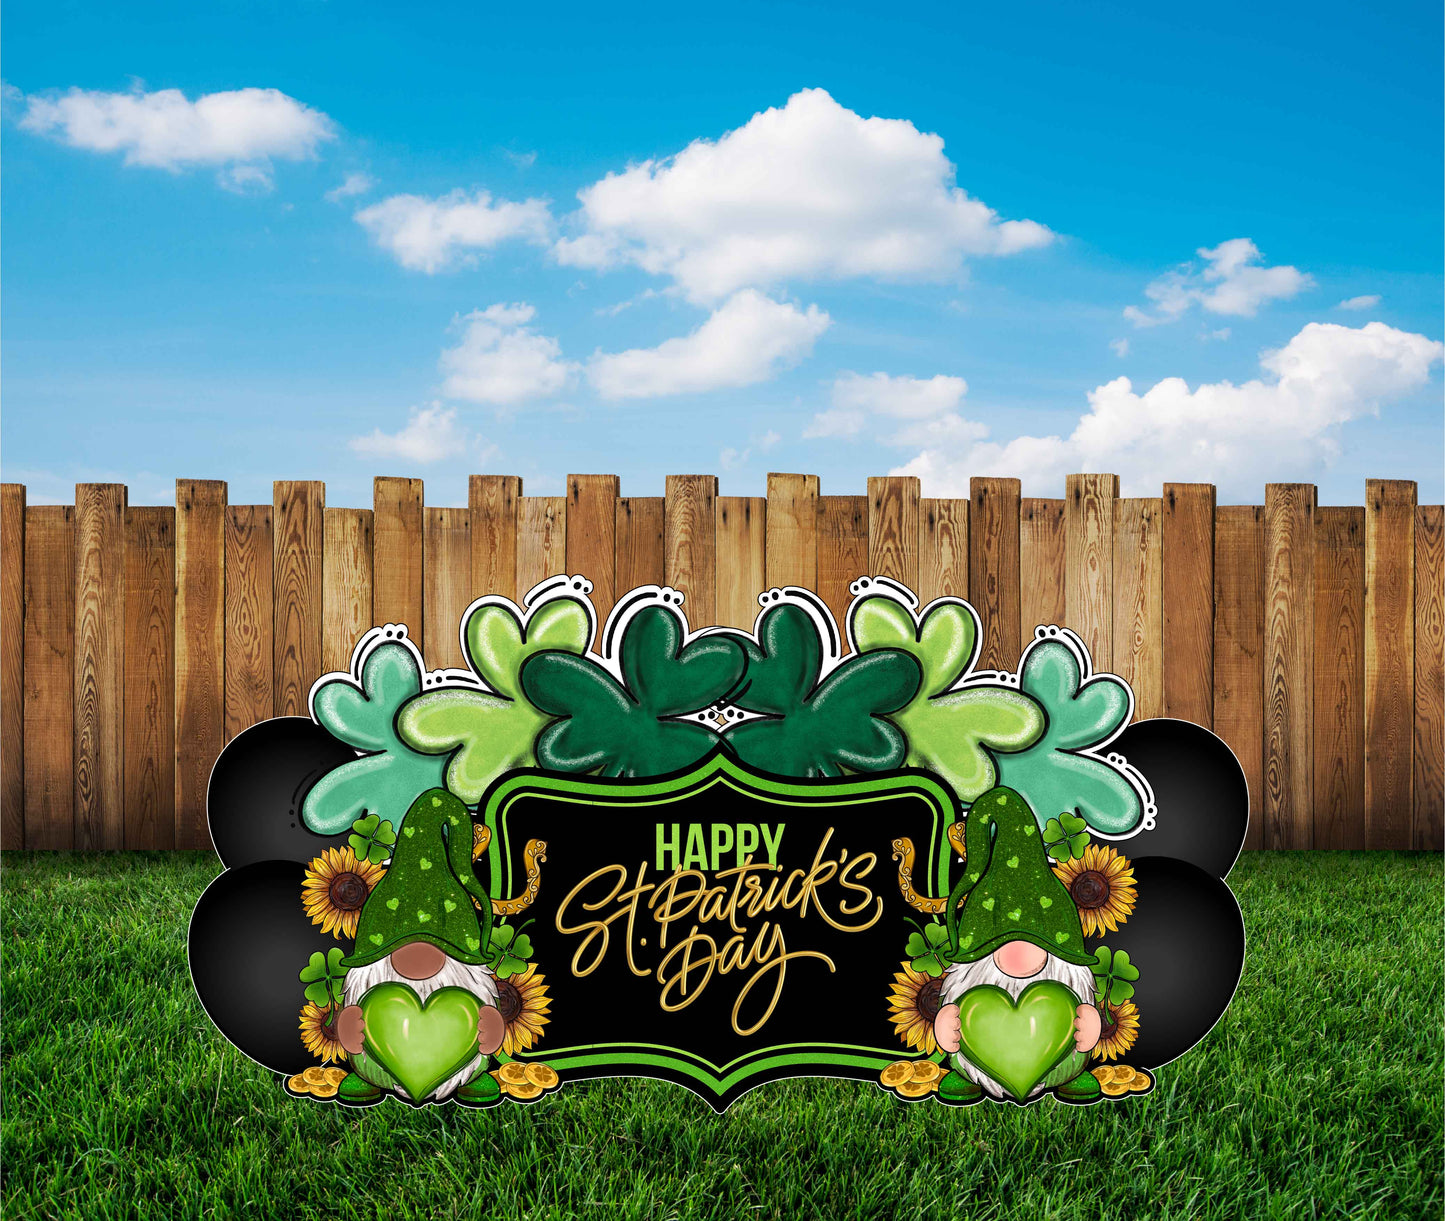 St. Patricks Day - Green Half Sheet  (Must Purchase 2 Half sheets - You Can Mix & Match)